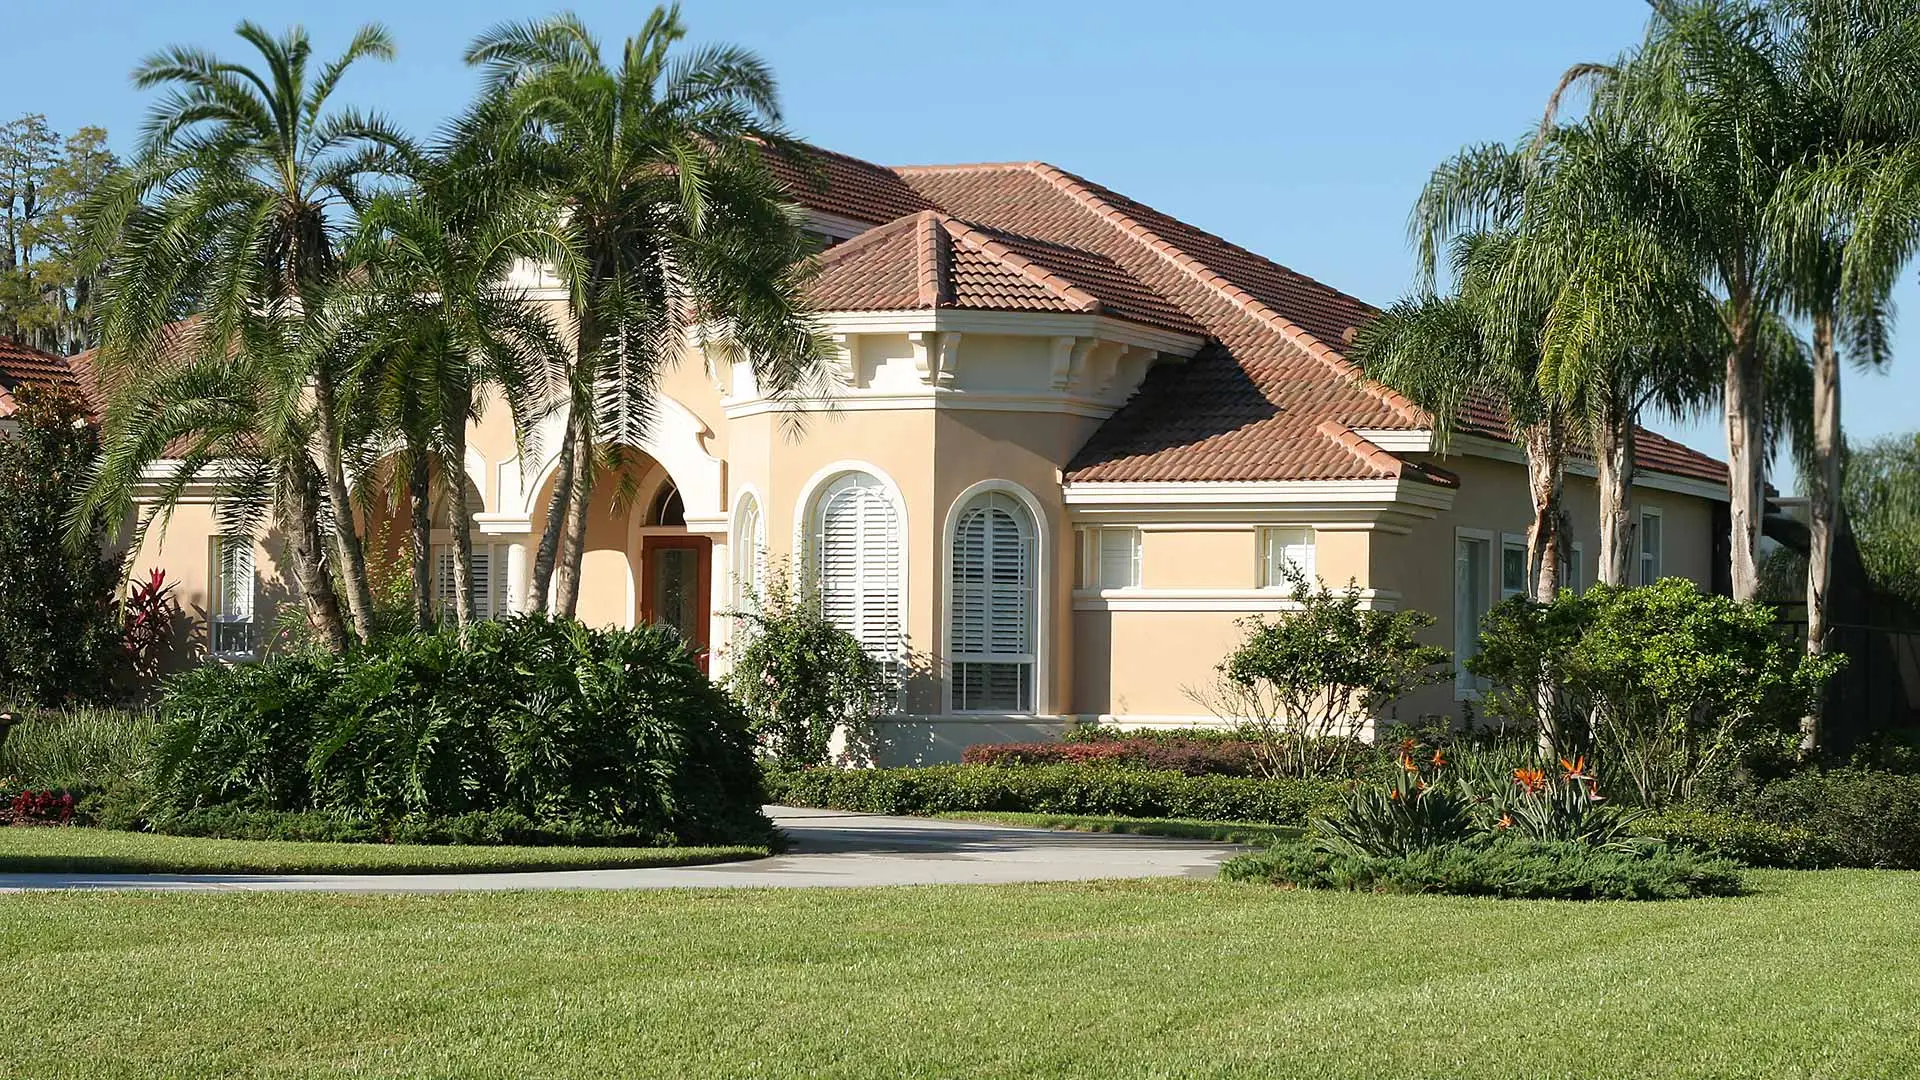 This West Palm Beach, FL home benefits from lawn care and custom landscaping.